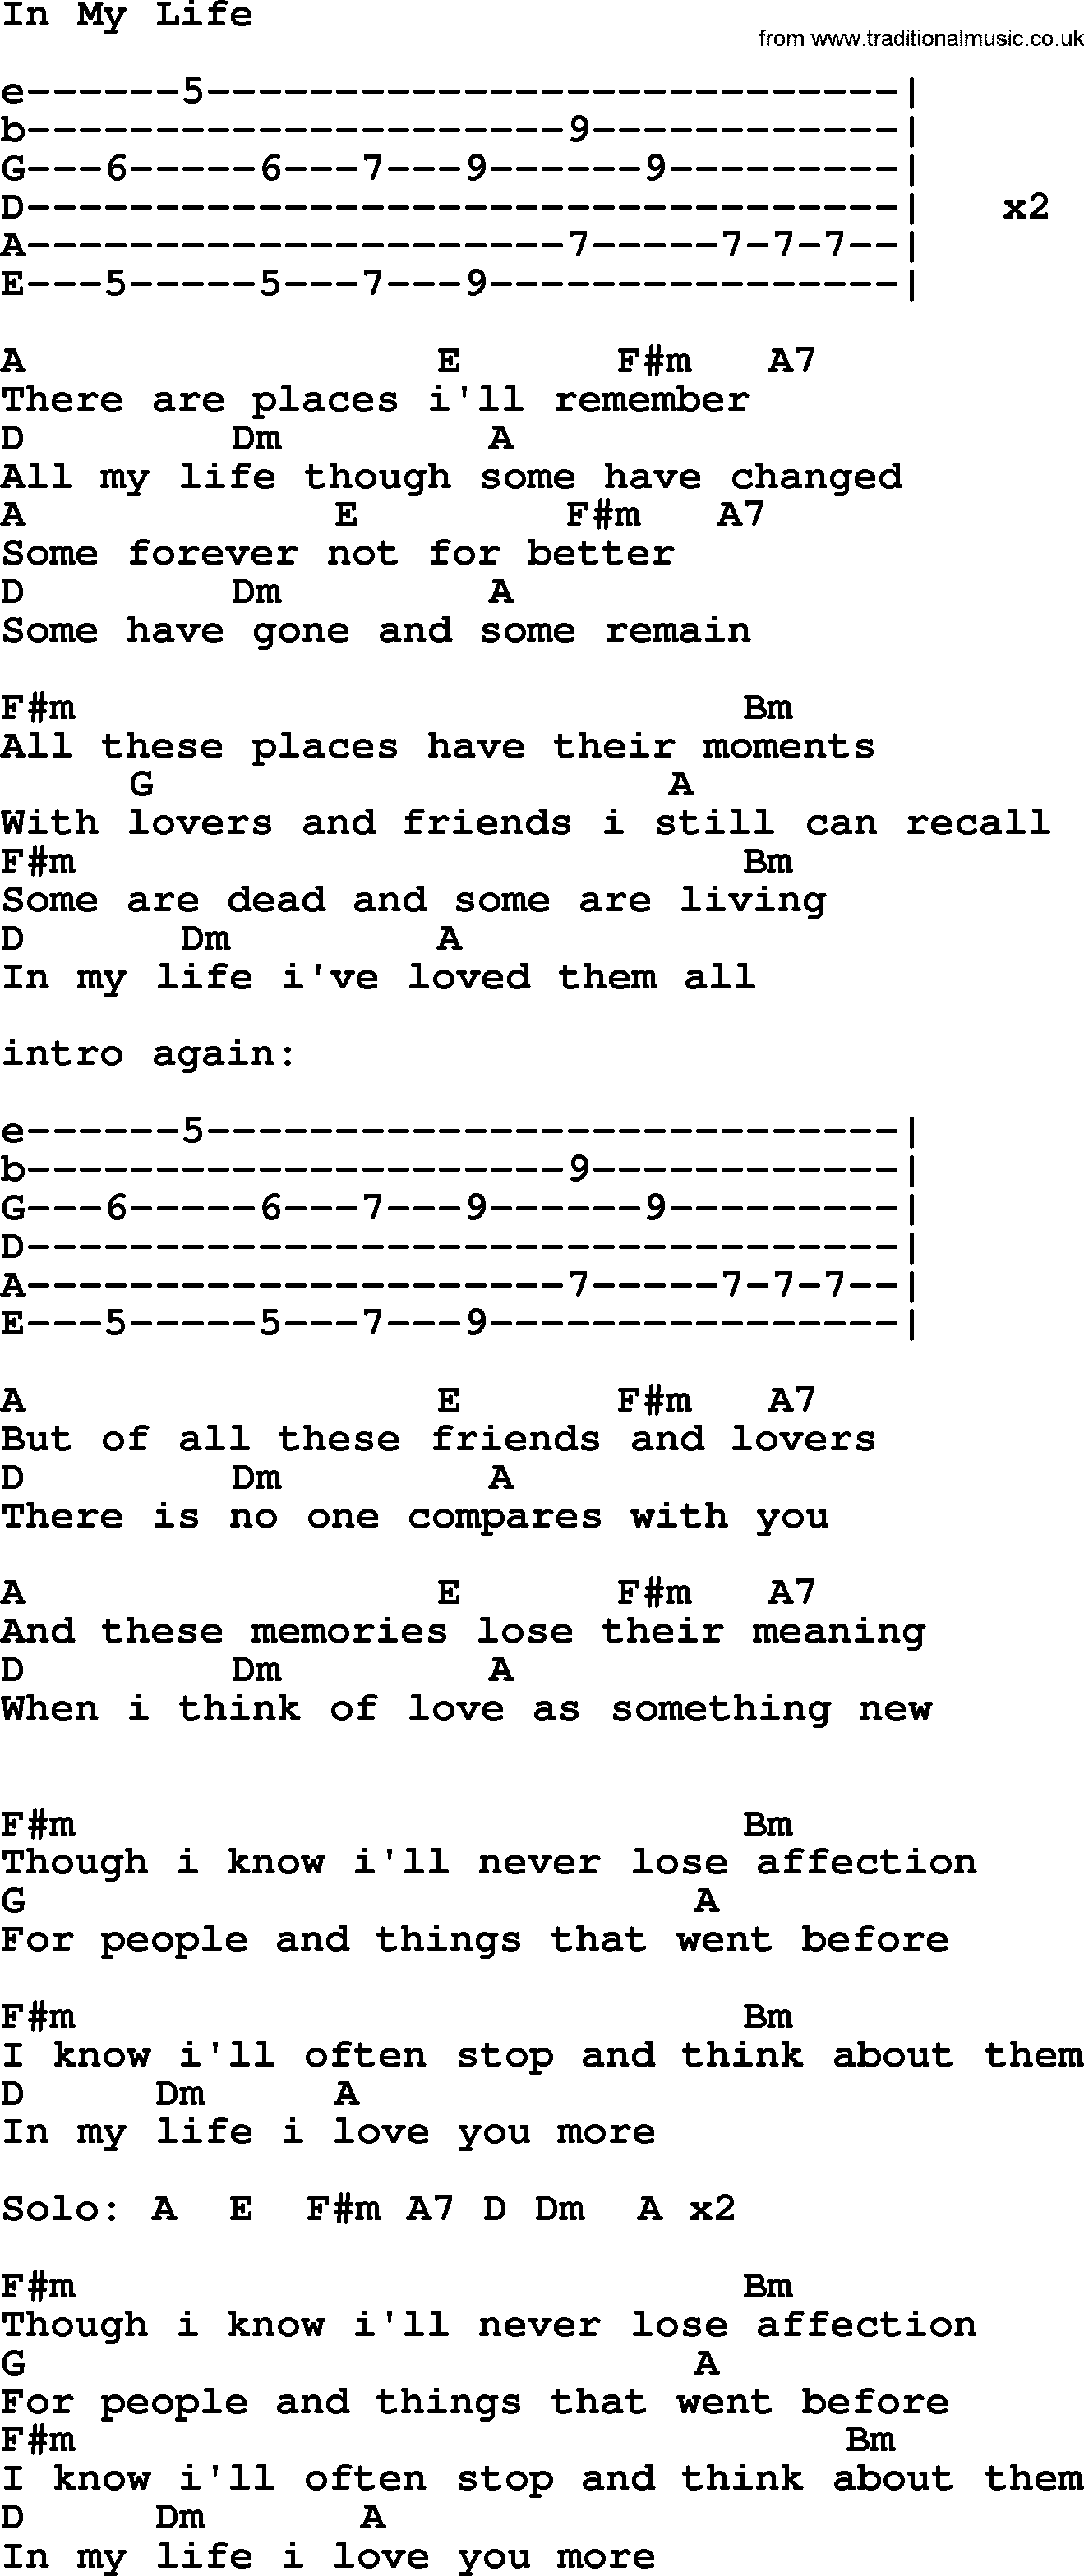 Johnny Cash song In My Life, lyrics and chords